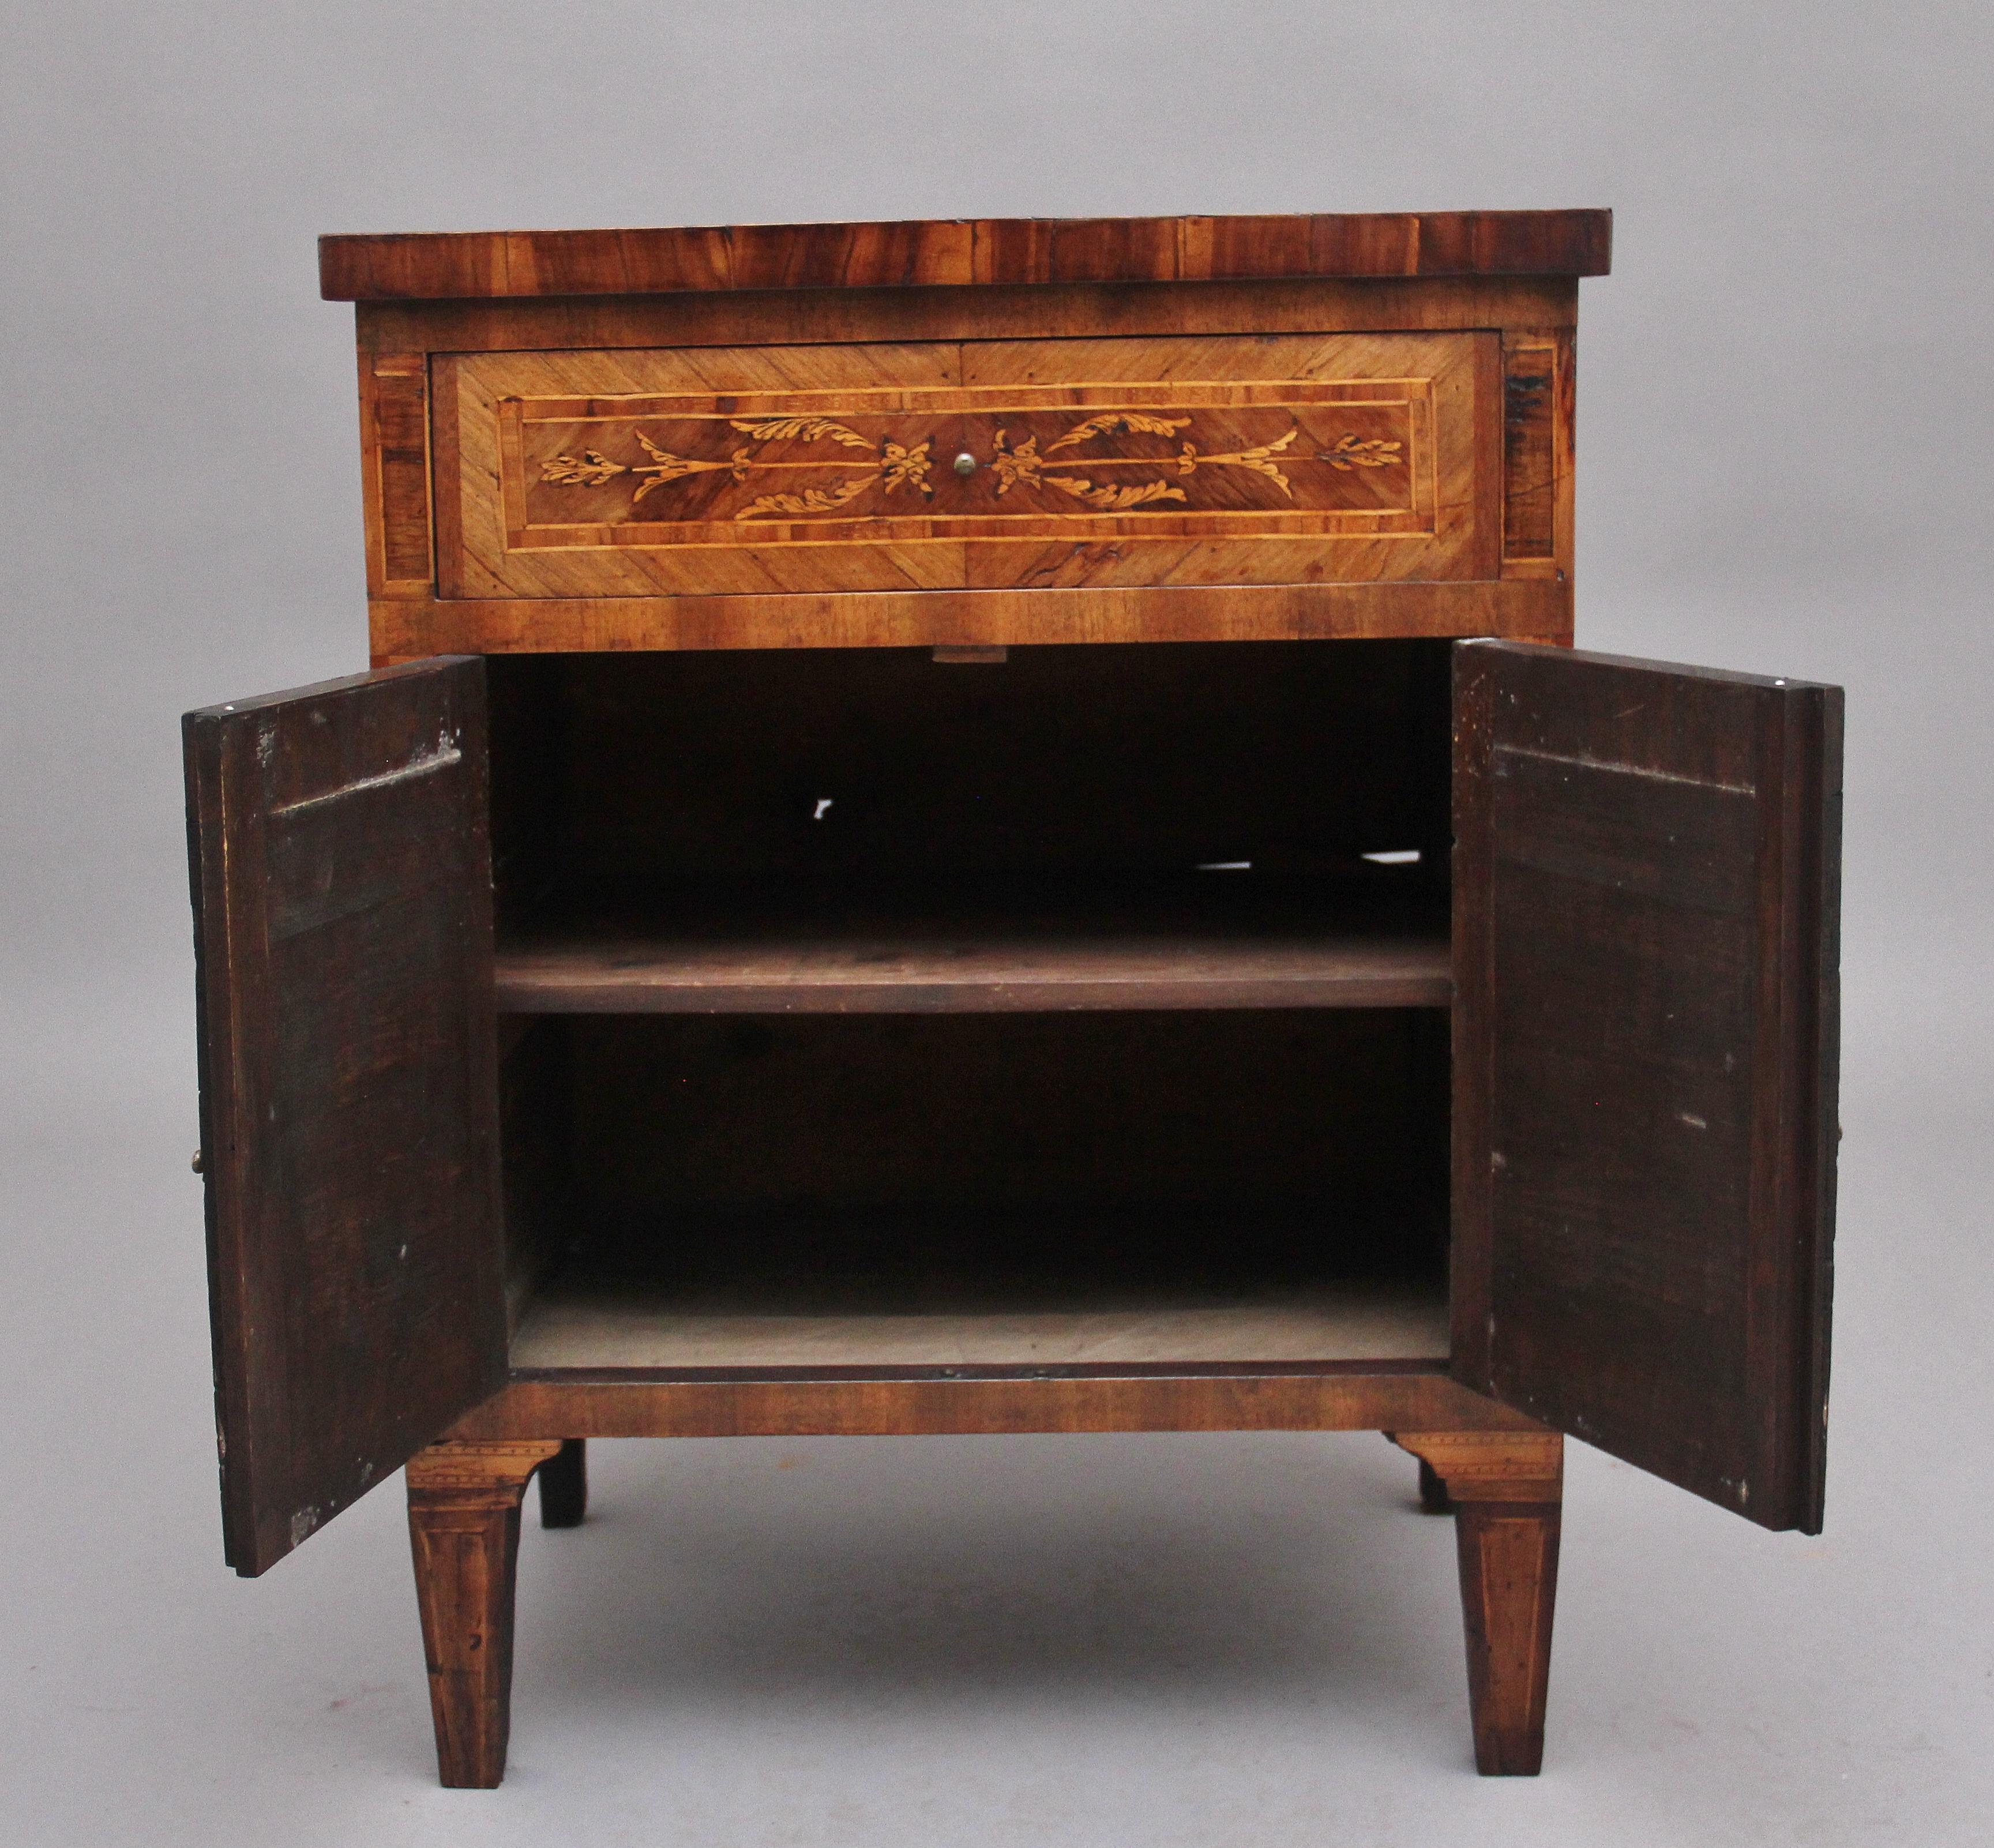 18th century Italian inlaid cabinet made from Kingwood and other exotic woods, the inlaid top above a frieze drawer and a two door cupboard below with a fixed single shelf inside, the drawer and door fronts having wonderful decorative marquetry